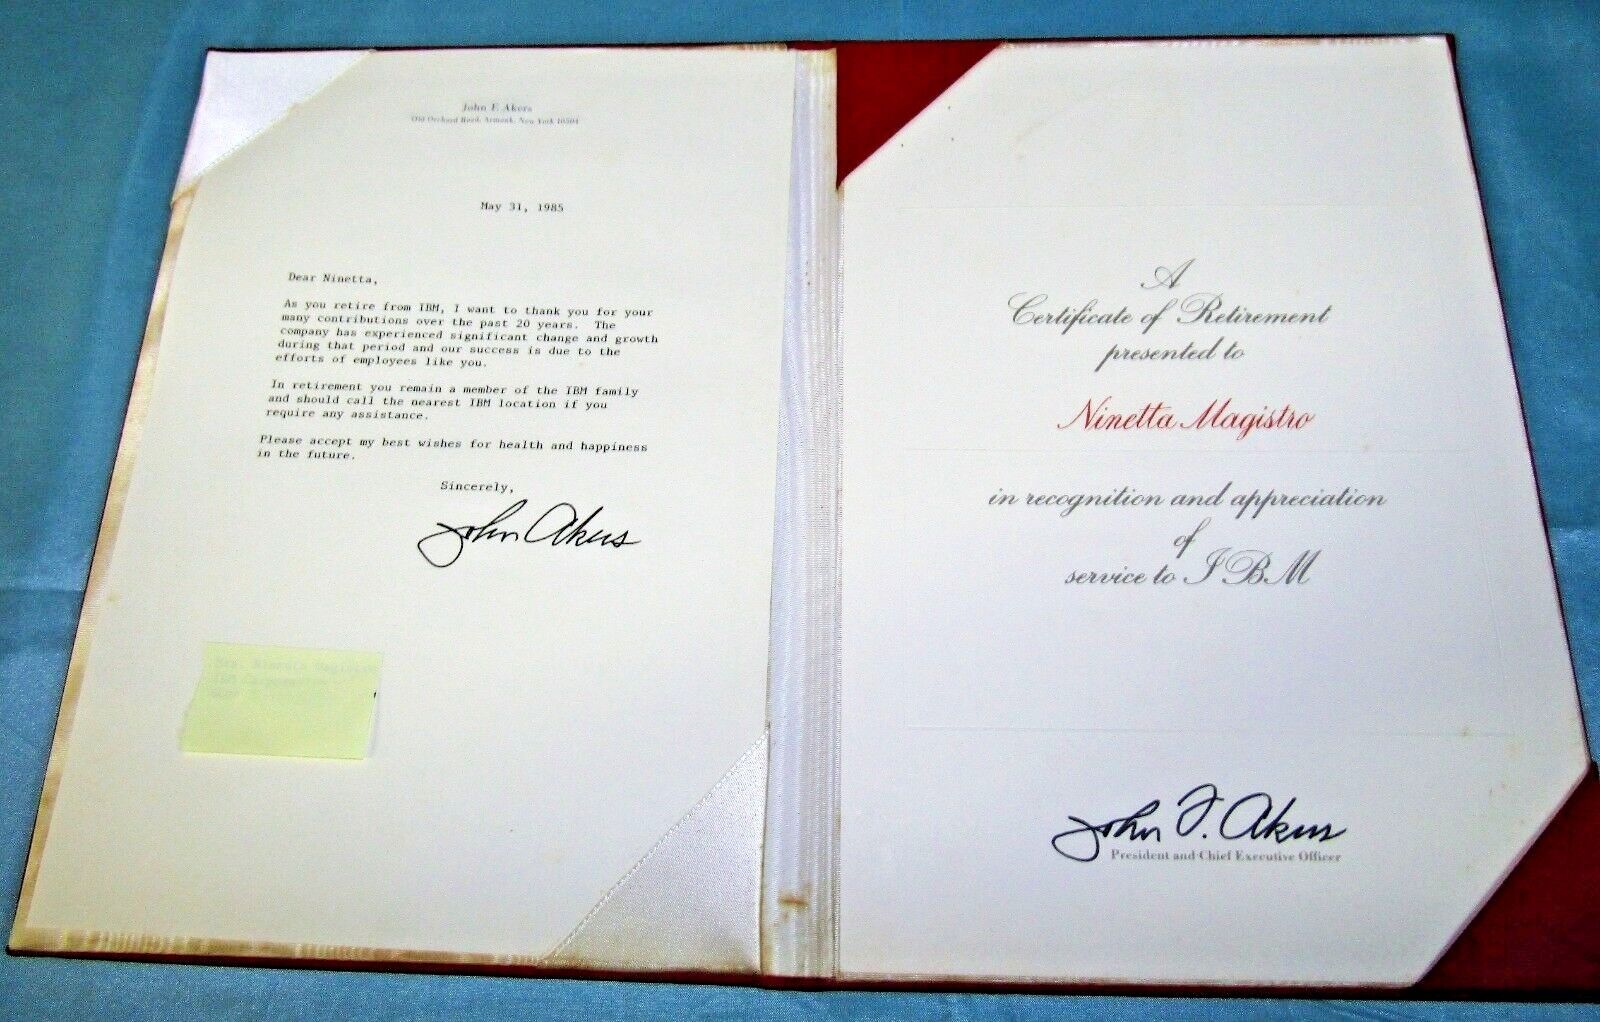 Signed Original Certificate of Retirement from IBM CEO JOHN F. AKERS dated 1985